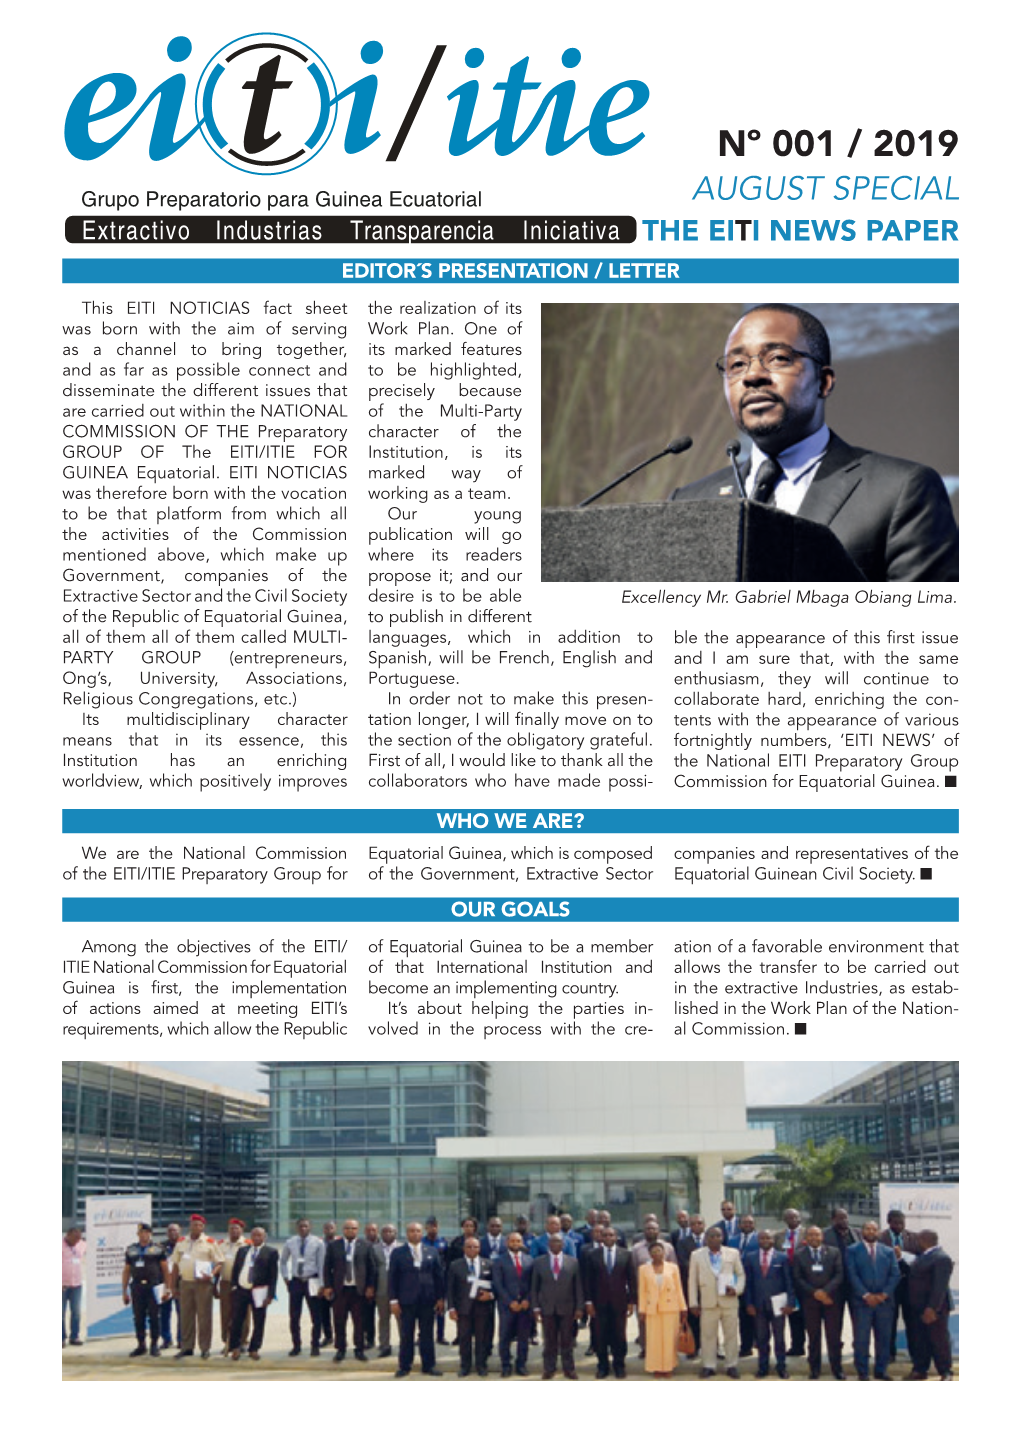 EITI NOTICIAS Fact Sheet the Realization of Its Was Born with the Aim of Serving Work Plan